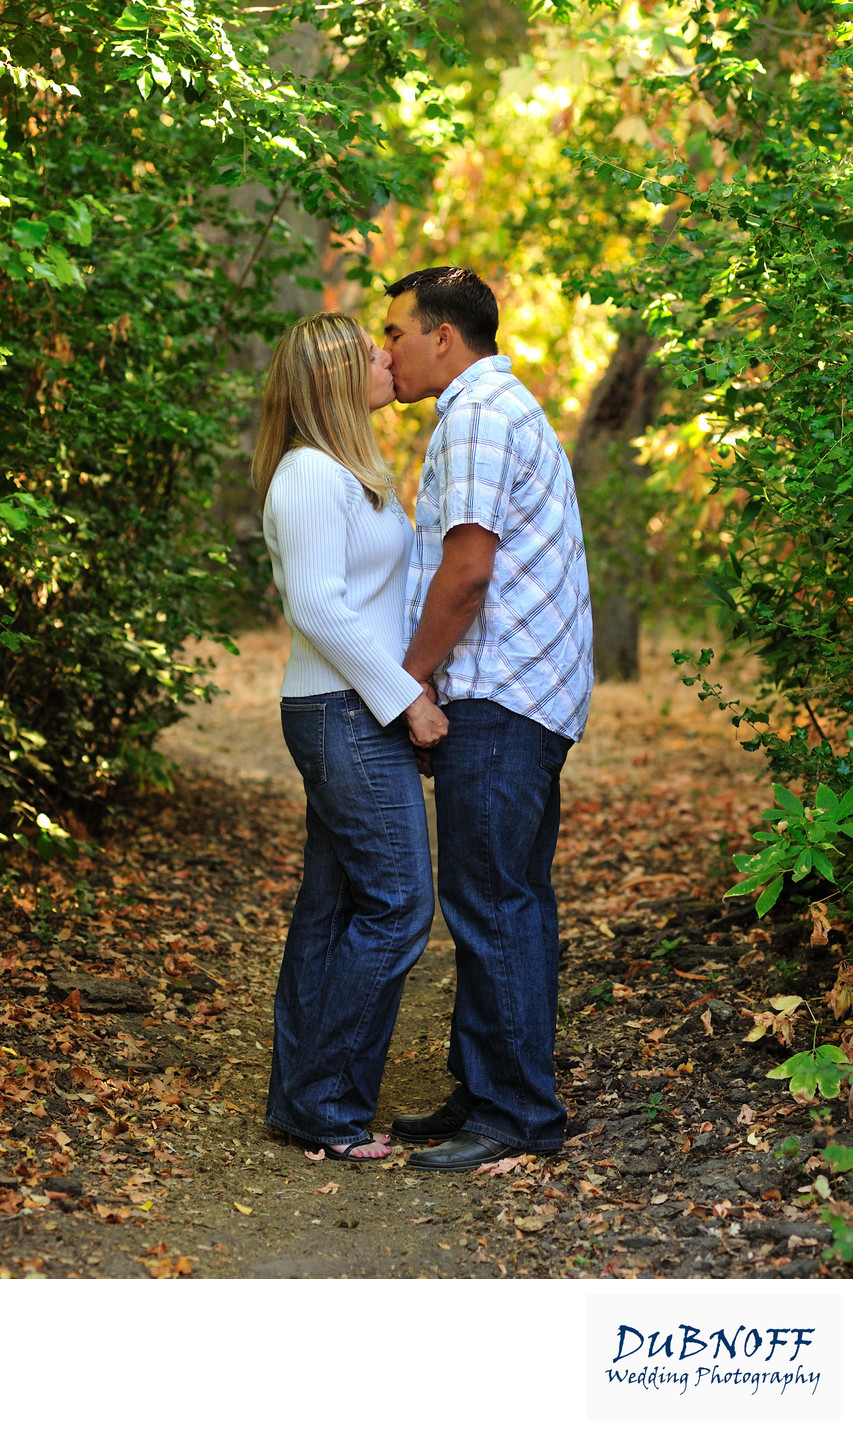 Beautiful Trees and Foliage for this Colorful Engagement Session